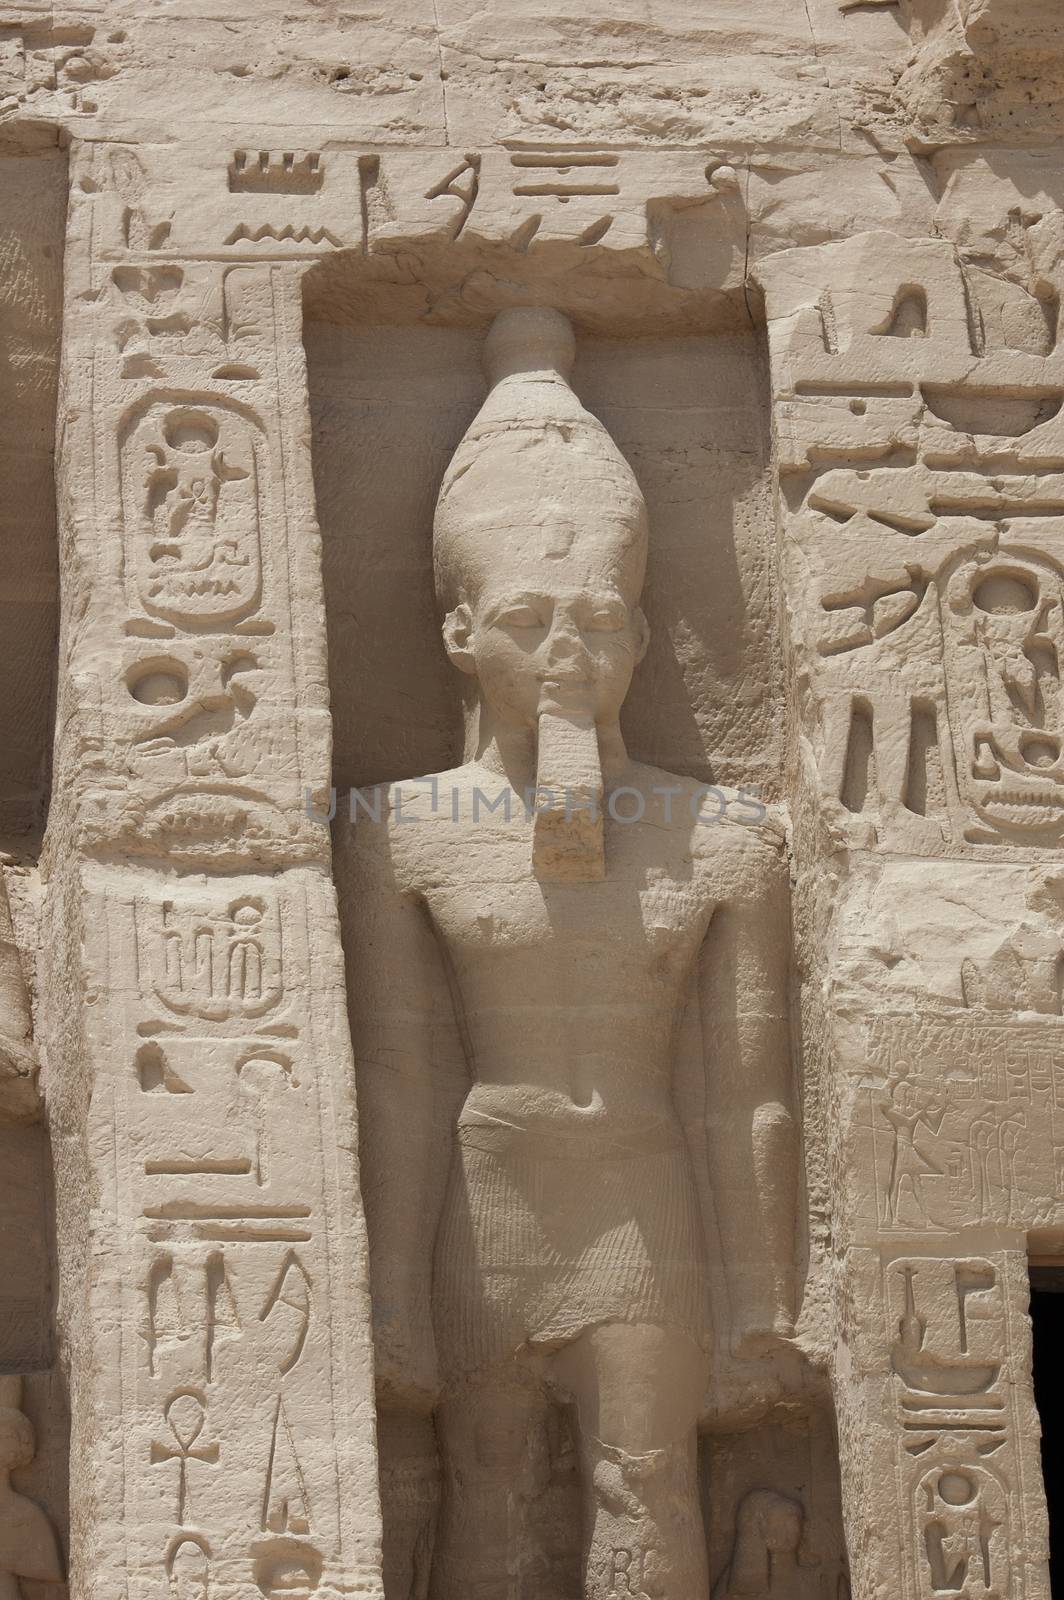 Colossal statue of Ramses II at the entrance to Abu Simbel Temple in Egypt